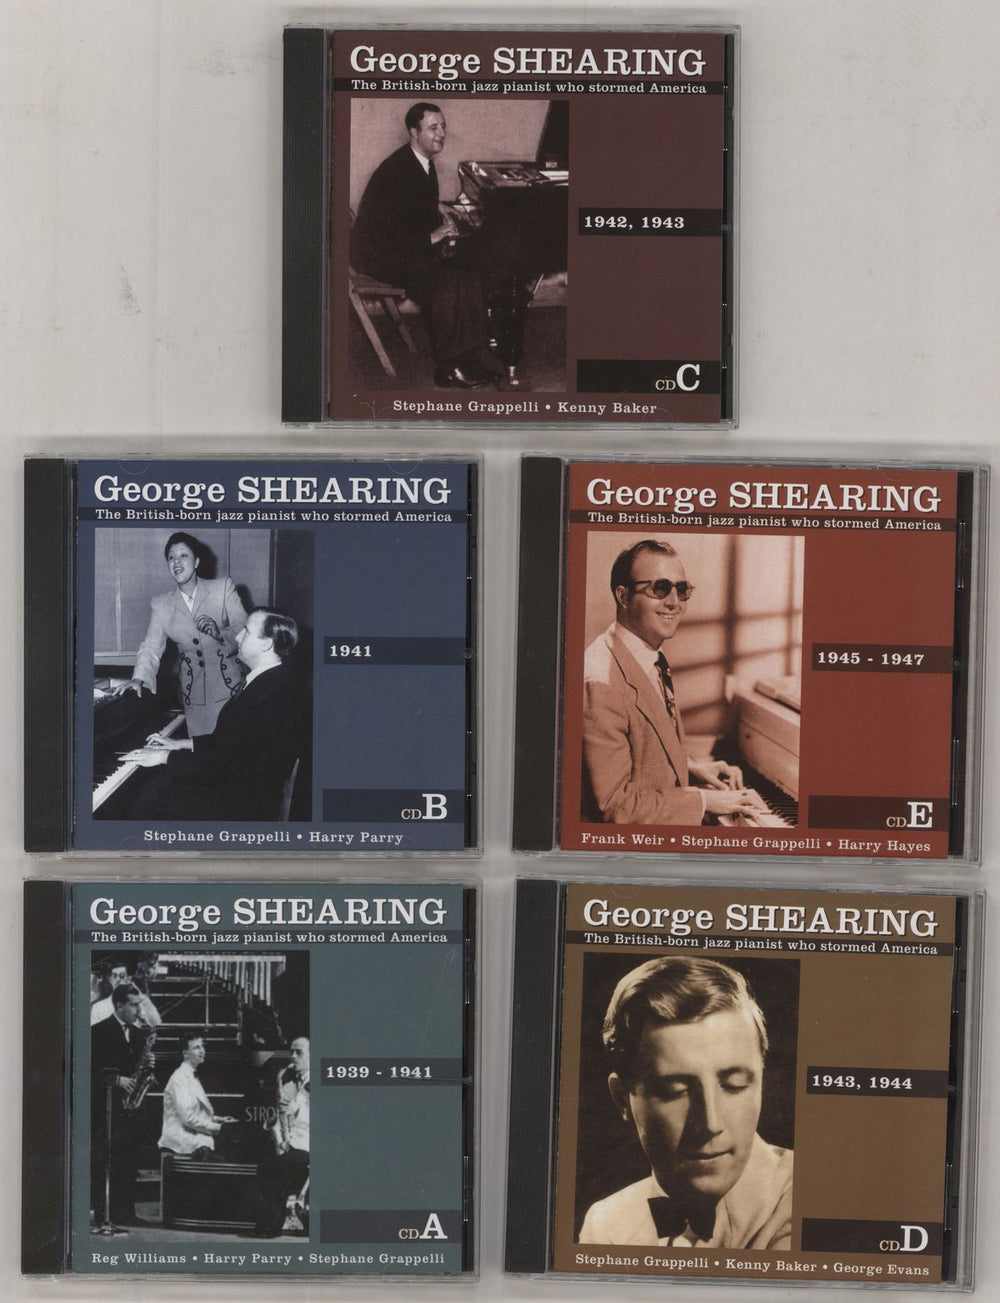 George Shearing The Early Years UK CD Single Box Set GSGCXTH813278